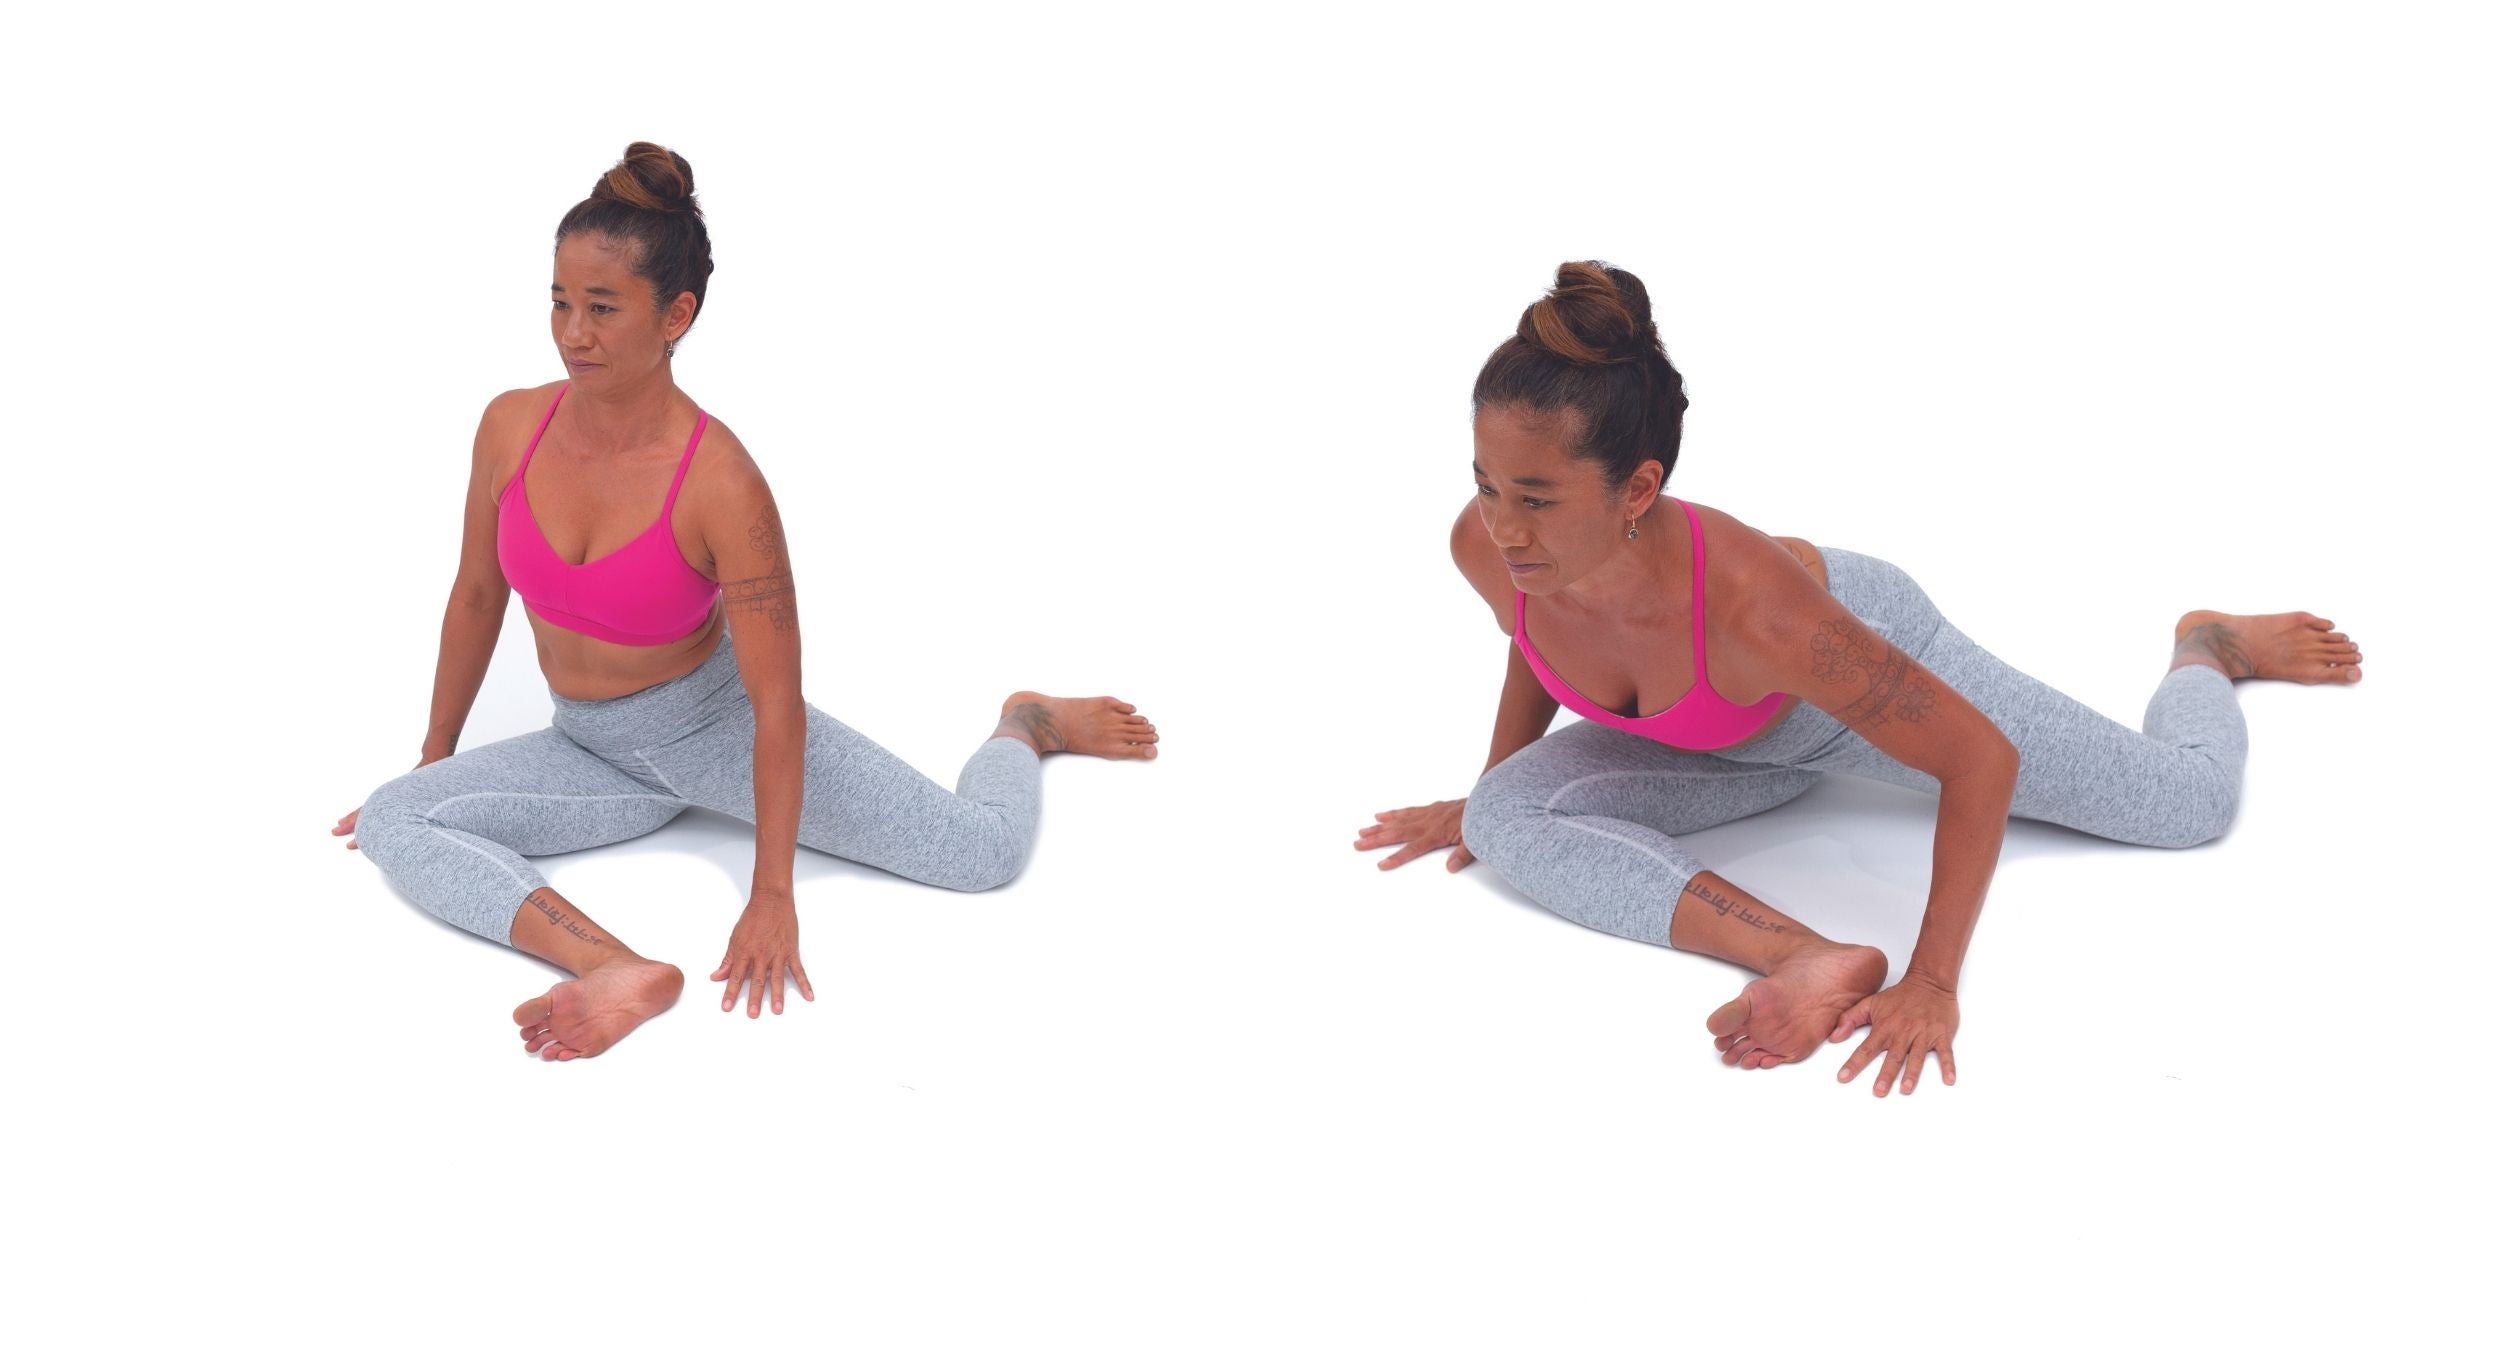 Nutrifit24 Club - Practice these 10 soothing stretches twice a day to  reverse damage caused by excess sitting. From a standing forward fold to a  gentle pigeon pose to open up tight